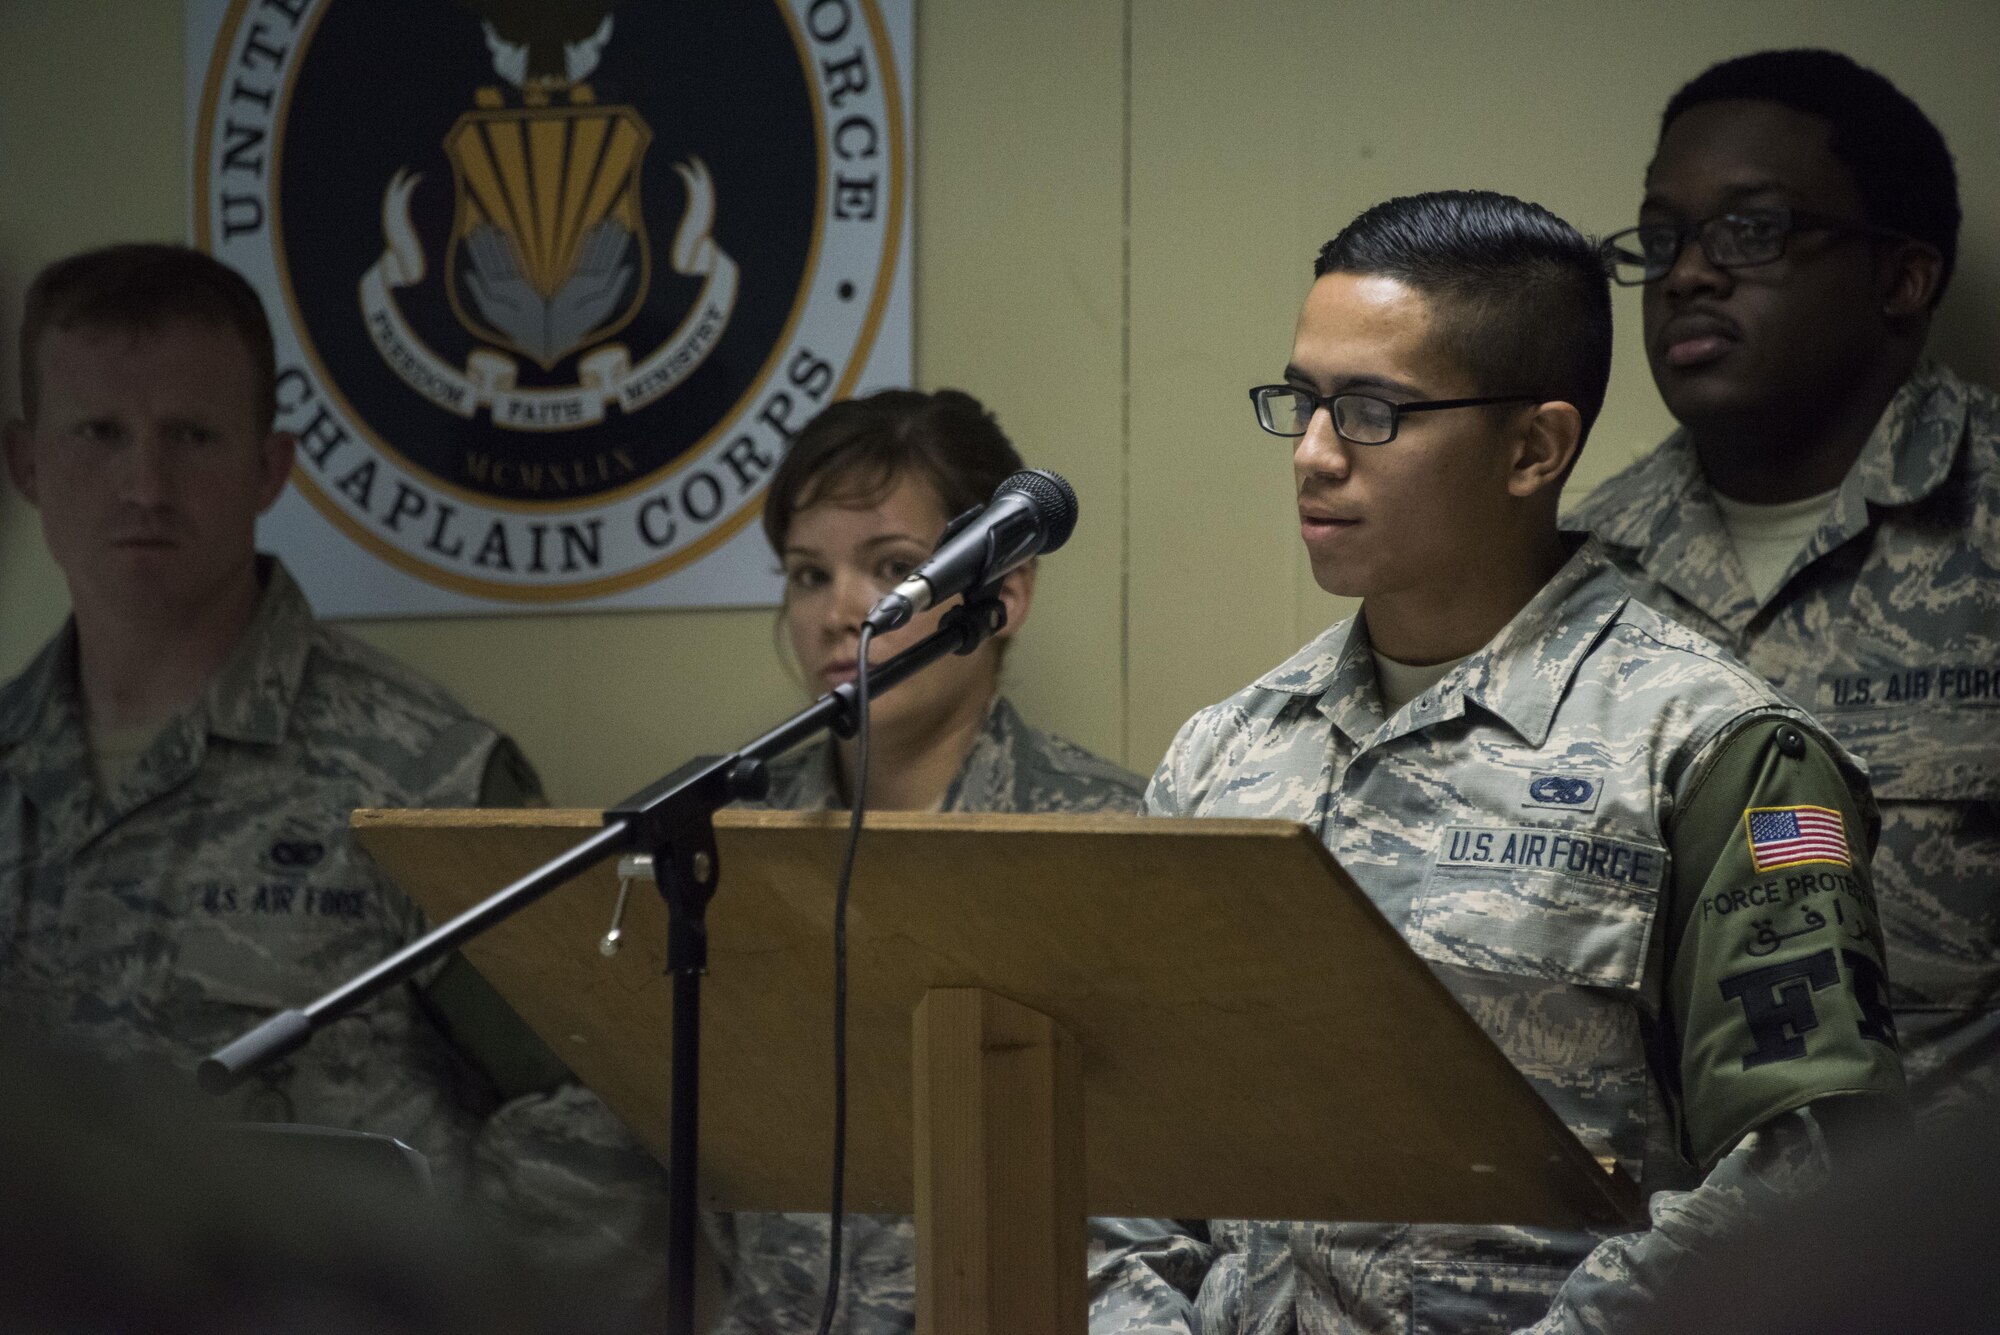 Airman Jonathan Quinones, a 386th Expeditionary Civil Engineer Squadron, Force Protection member, reflects on the role that spiritual resiliency plays in helping him persevere in completing the mission, during a Faith Works leadership luncheon, at an undisclosed location in Southwest Asia, May 4, 2017. The U.S. Air Force Chaplain Corps recently rolled out the Faith Works campaign to inform Airmen about the overwhelming evidence regarding the positive relationship between spirituality, religion, and health. (U.S. Air Force photo/ Tech. Sgt. Jonathan Hehnly)